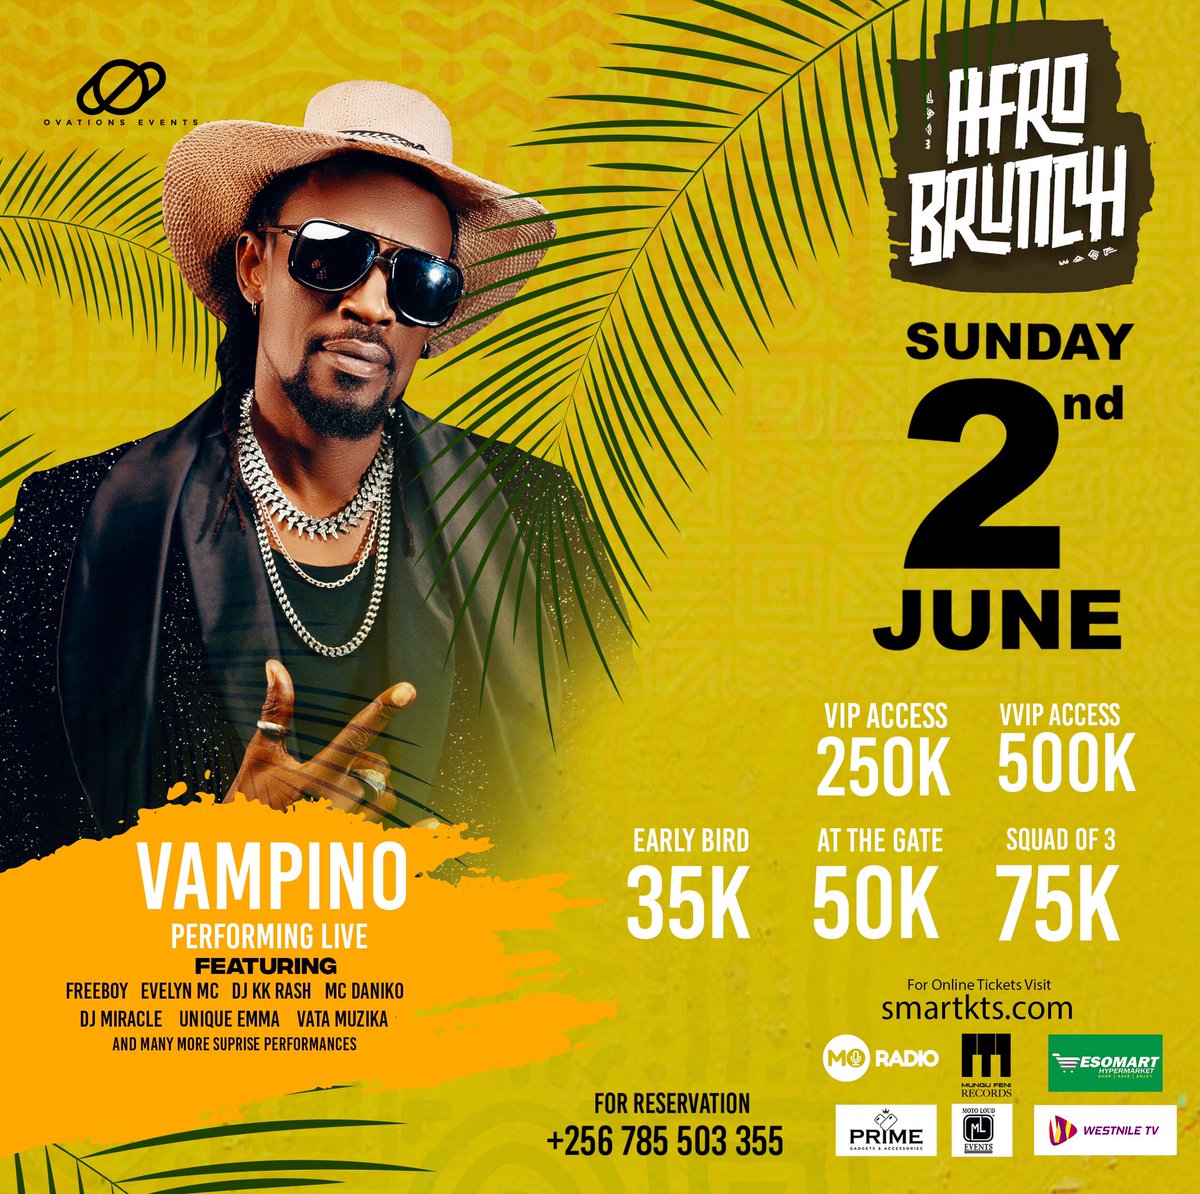 This edition is going to be massive with the Dancehall king himself @Vampinoxrated the top of the Lineup. Early bird tickets are going for 35k and 75k. All tickets are available via Smart Tickets App or visit smartkts.com #afrobrunchArua